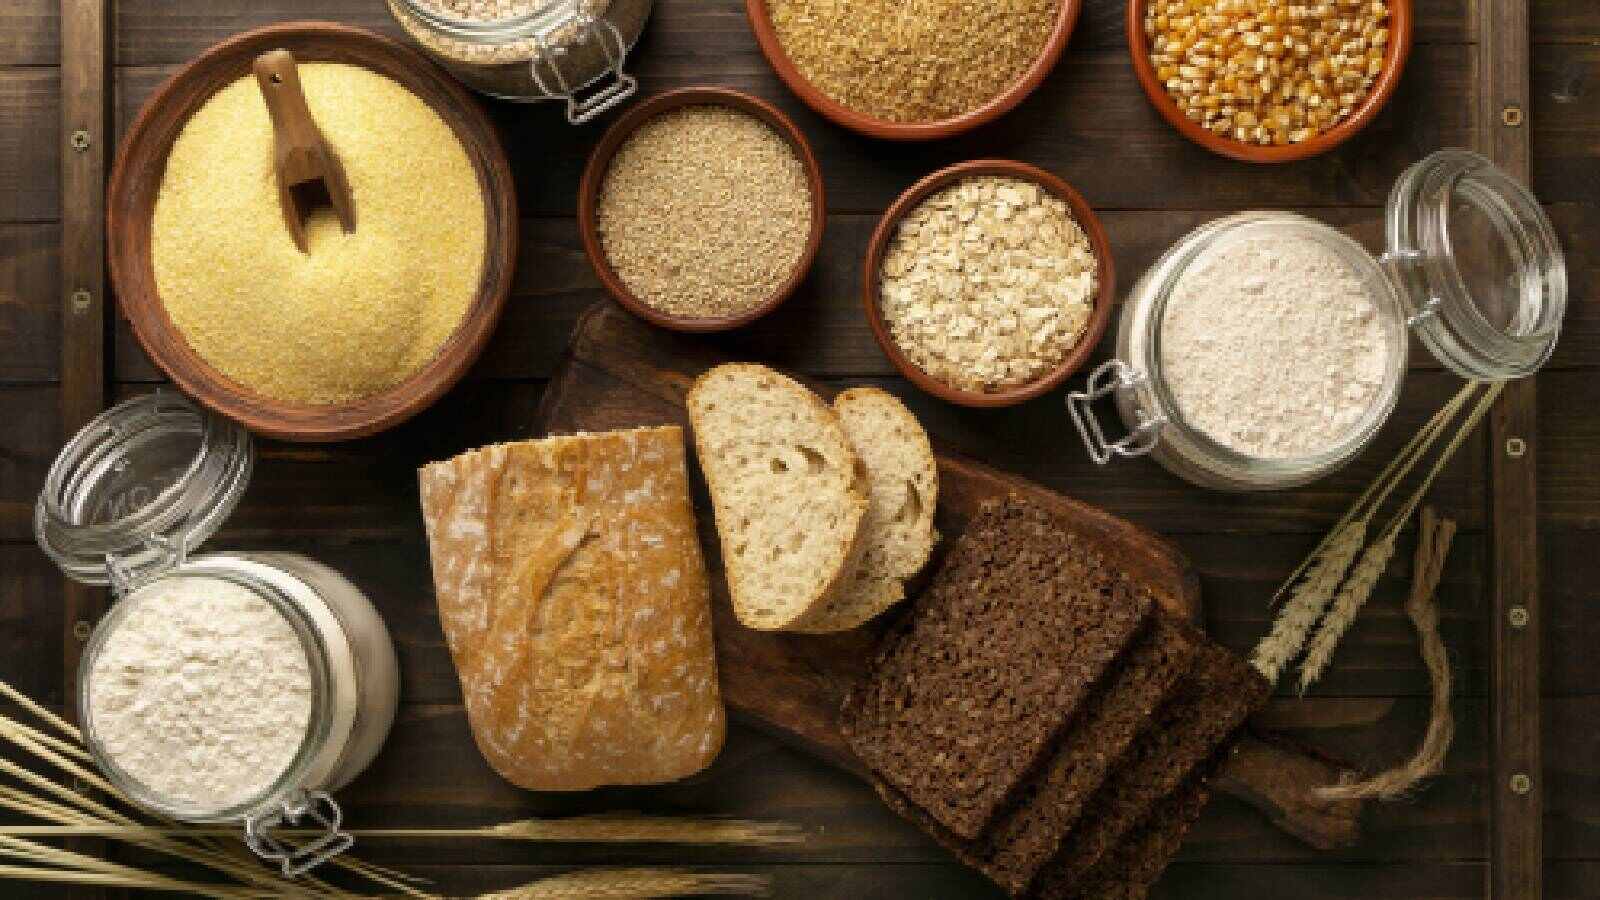 Carb cycling: What is it and how to do it?